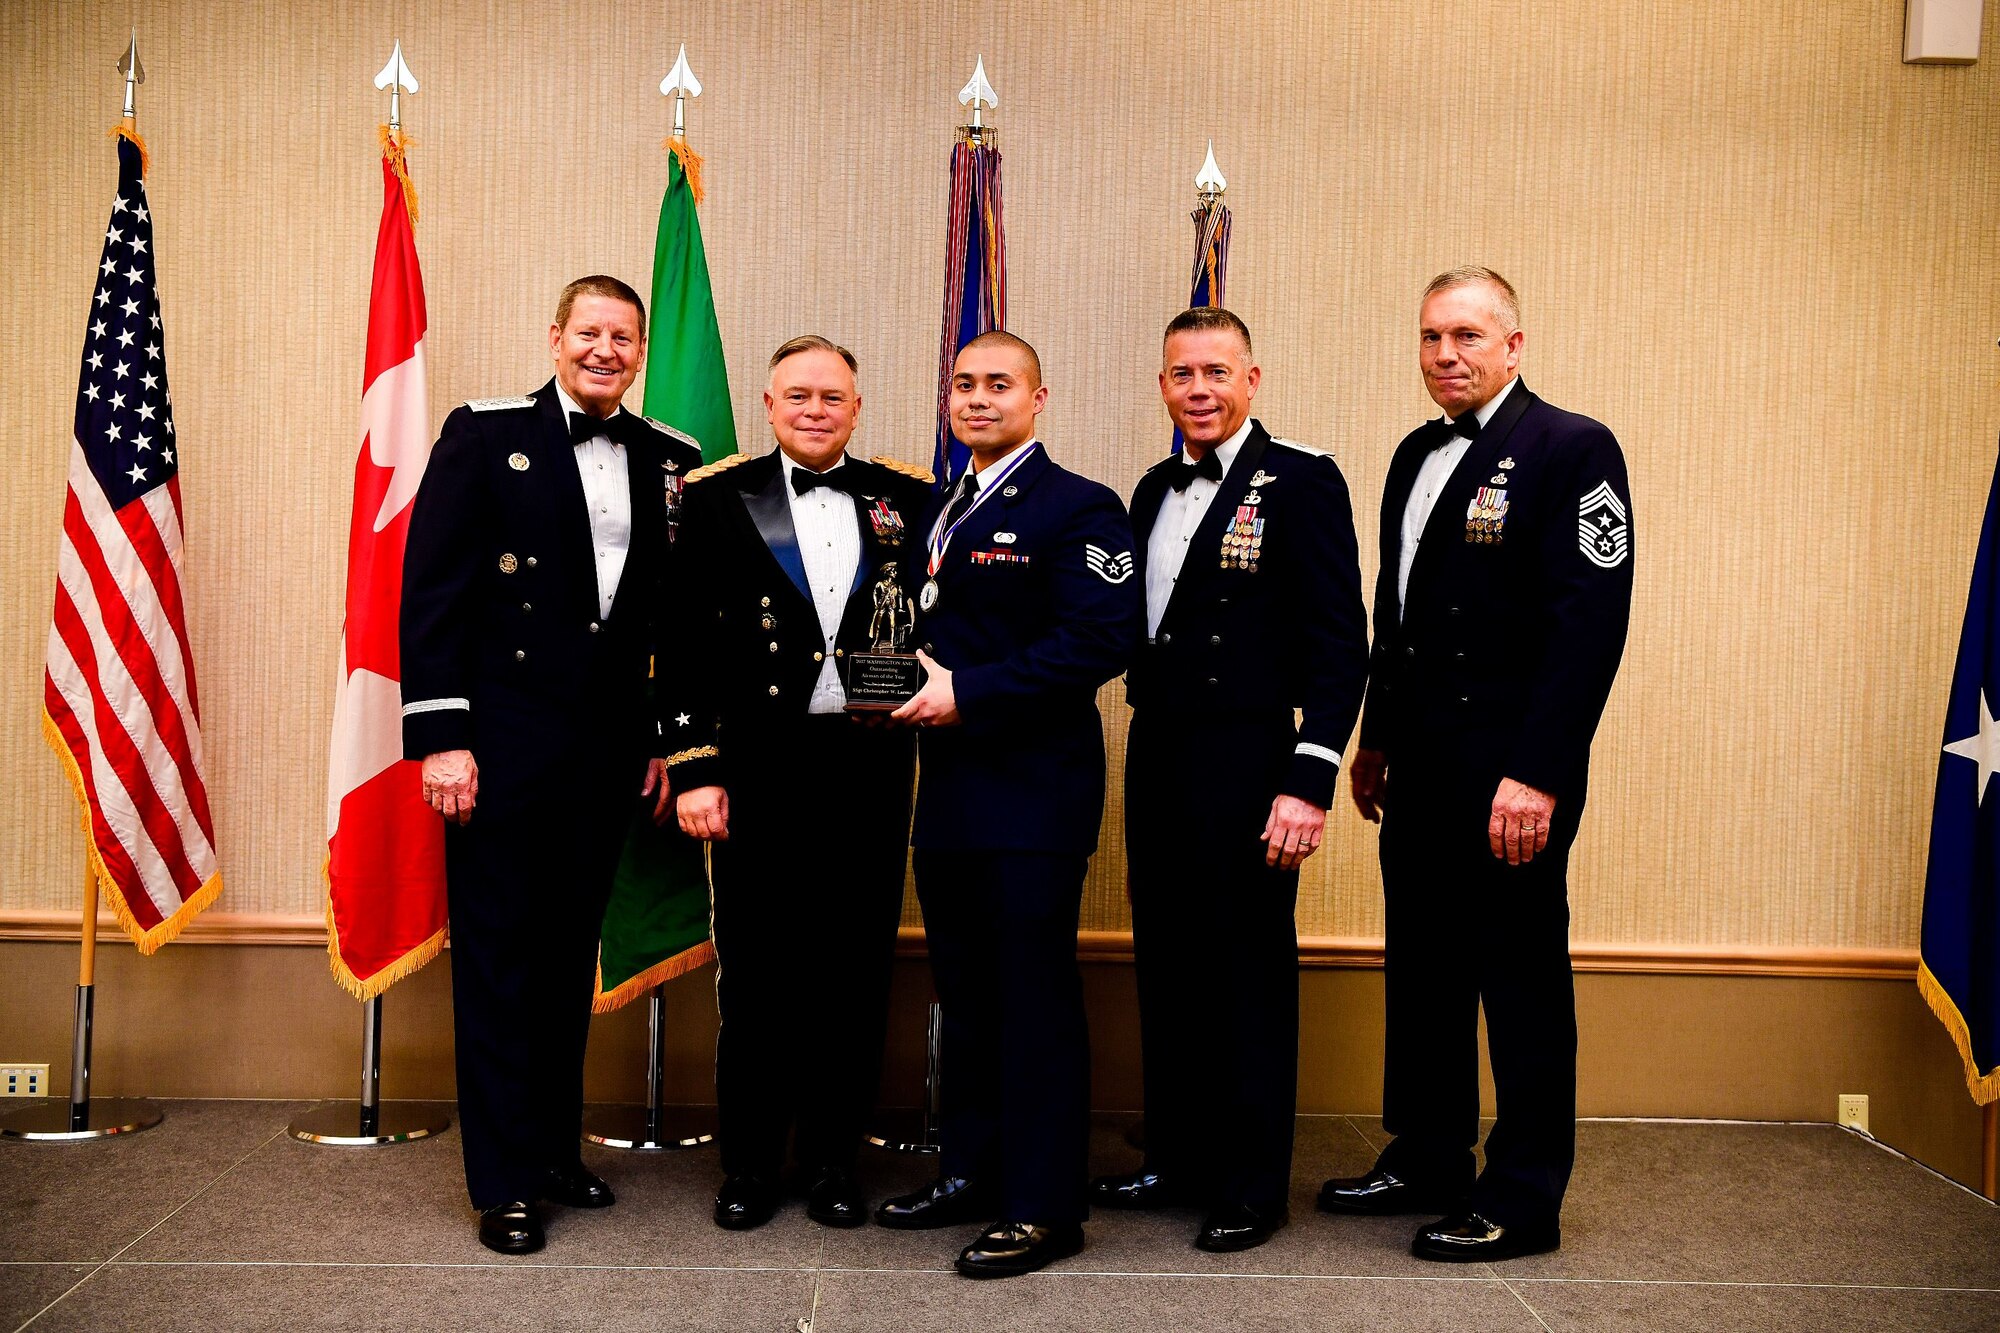 Staff Sgt. Christopher LaCour, a cyber systems operations journeyman with the 225th Support Squadron, Western Air Defense Sector, is presented with the Airman of the Year trophy at the Washington Air National Guard’s 9th Annual Awards Banquet held at the American Lake Conference Center on Joint Base Lewis-McChord, Washington, Jan. 27, 2018.  LaCour was awarded the trophy for his outstanding contributions to the Washington Air National Guard over the last year.  Pictured from left to right are: Gen. Robin Rand, Air Force Global Strike Command and Air Forces Strategic-Air, U.S. Strategic Command commander; Maj. Gen. Bret Daugherty, Adjutant General of the Washington National Guard, LaCour, Brig. Gen. Jeremy Horn, commander of the Washington Air National Guard, and Chief Master Sgt. Max Tidwell, WA ANG command chief. (U.S. Air National Guard photo by Tech. Sgt. Timothy Chacon)